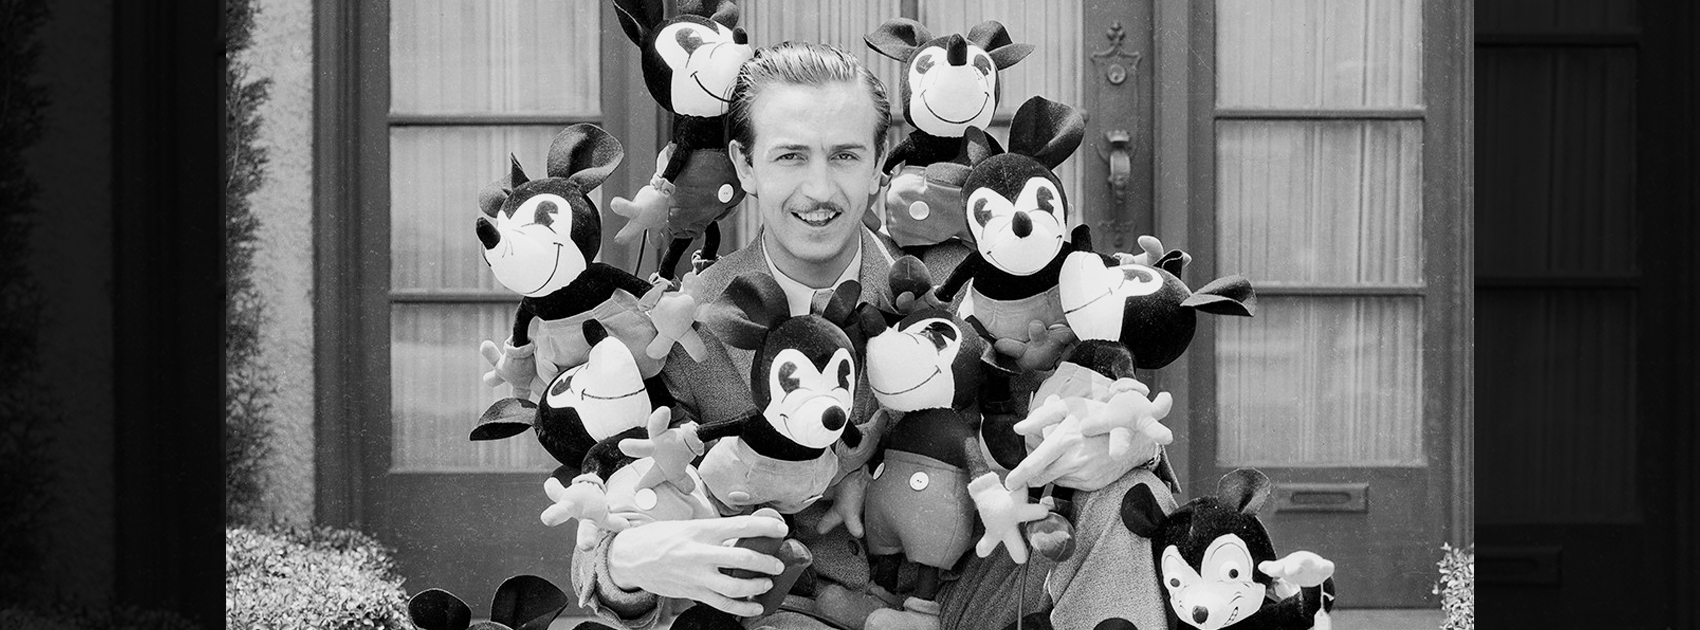 5 Lessons Every Entrepreneur Can Learn From Walt Disney,Startup Stories,2019 Best Inspirational Stories,5 Lessons Every for Entrepreneur,Walt Disney Life Lessons,Walt Disney Success Lessons,Walt Disney Success Story,Walt Disney Founder,Walt Disney Leadership Lessons